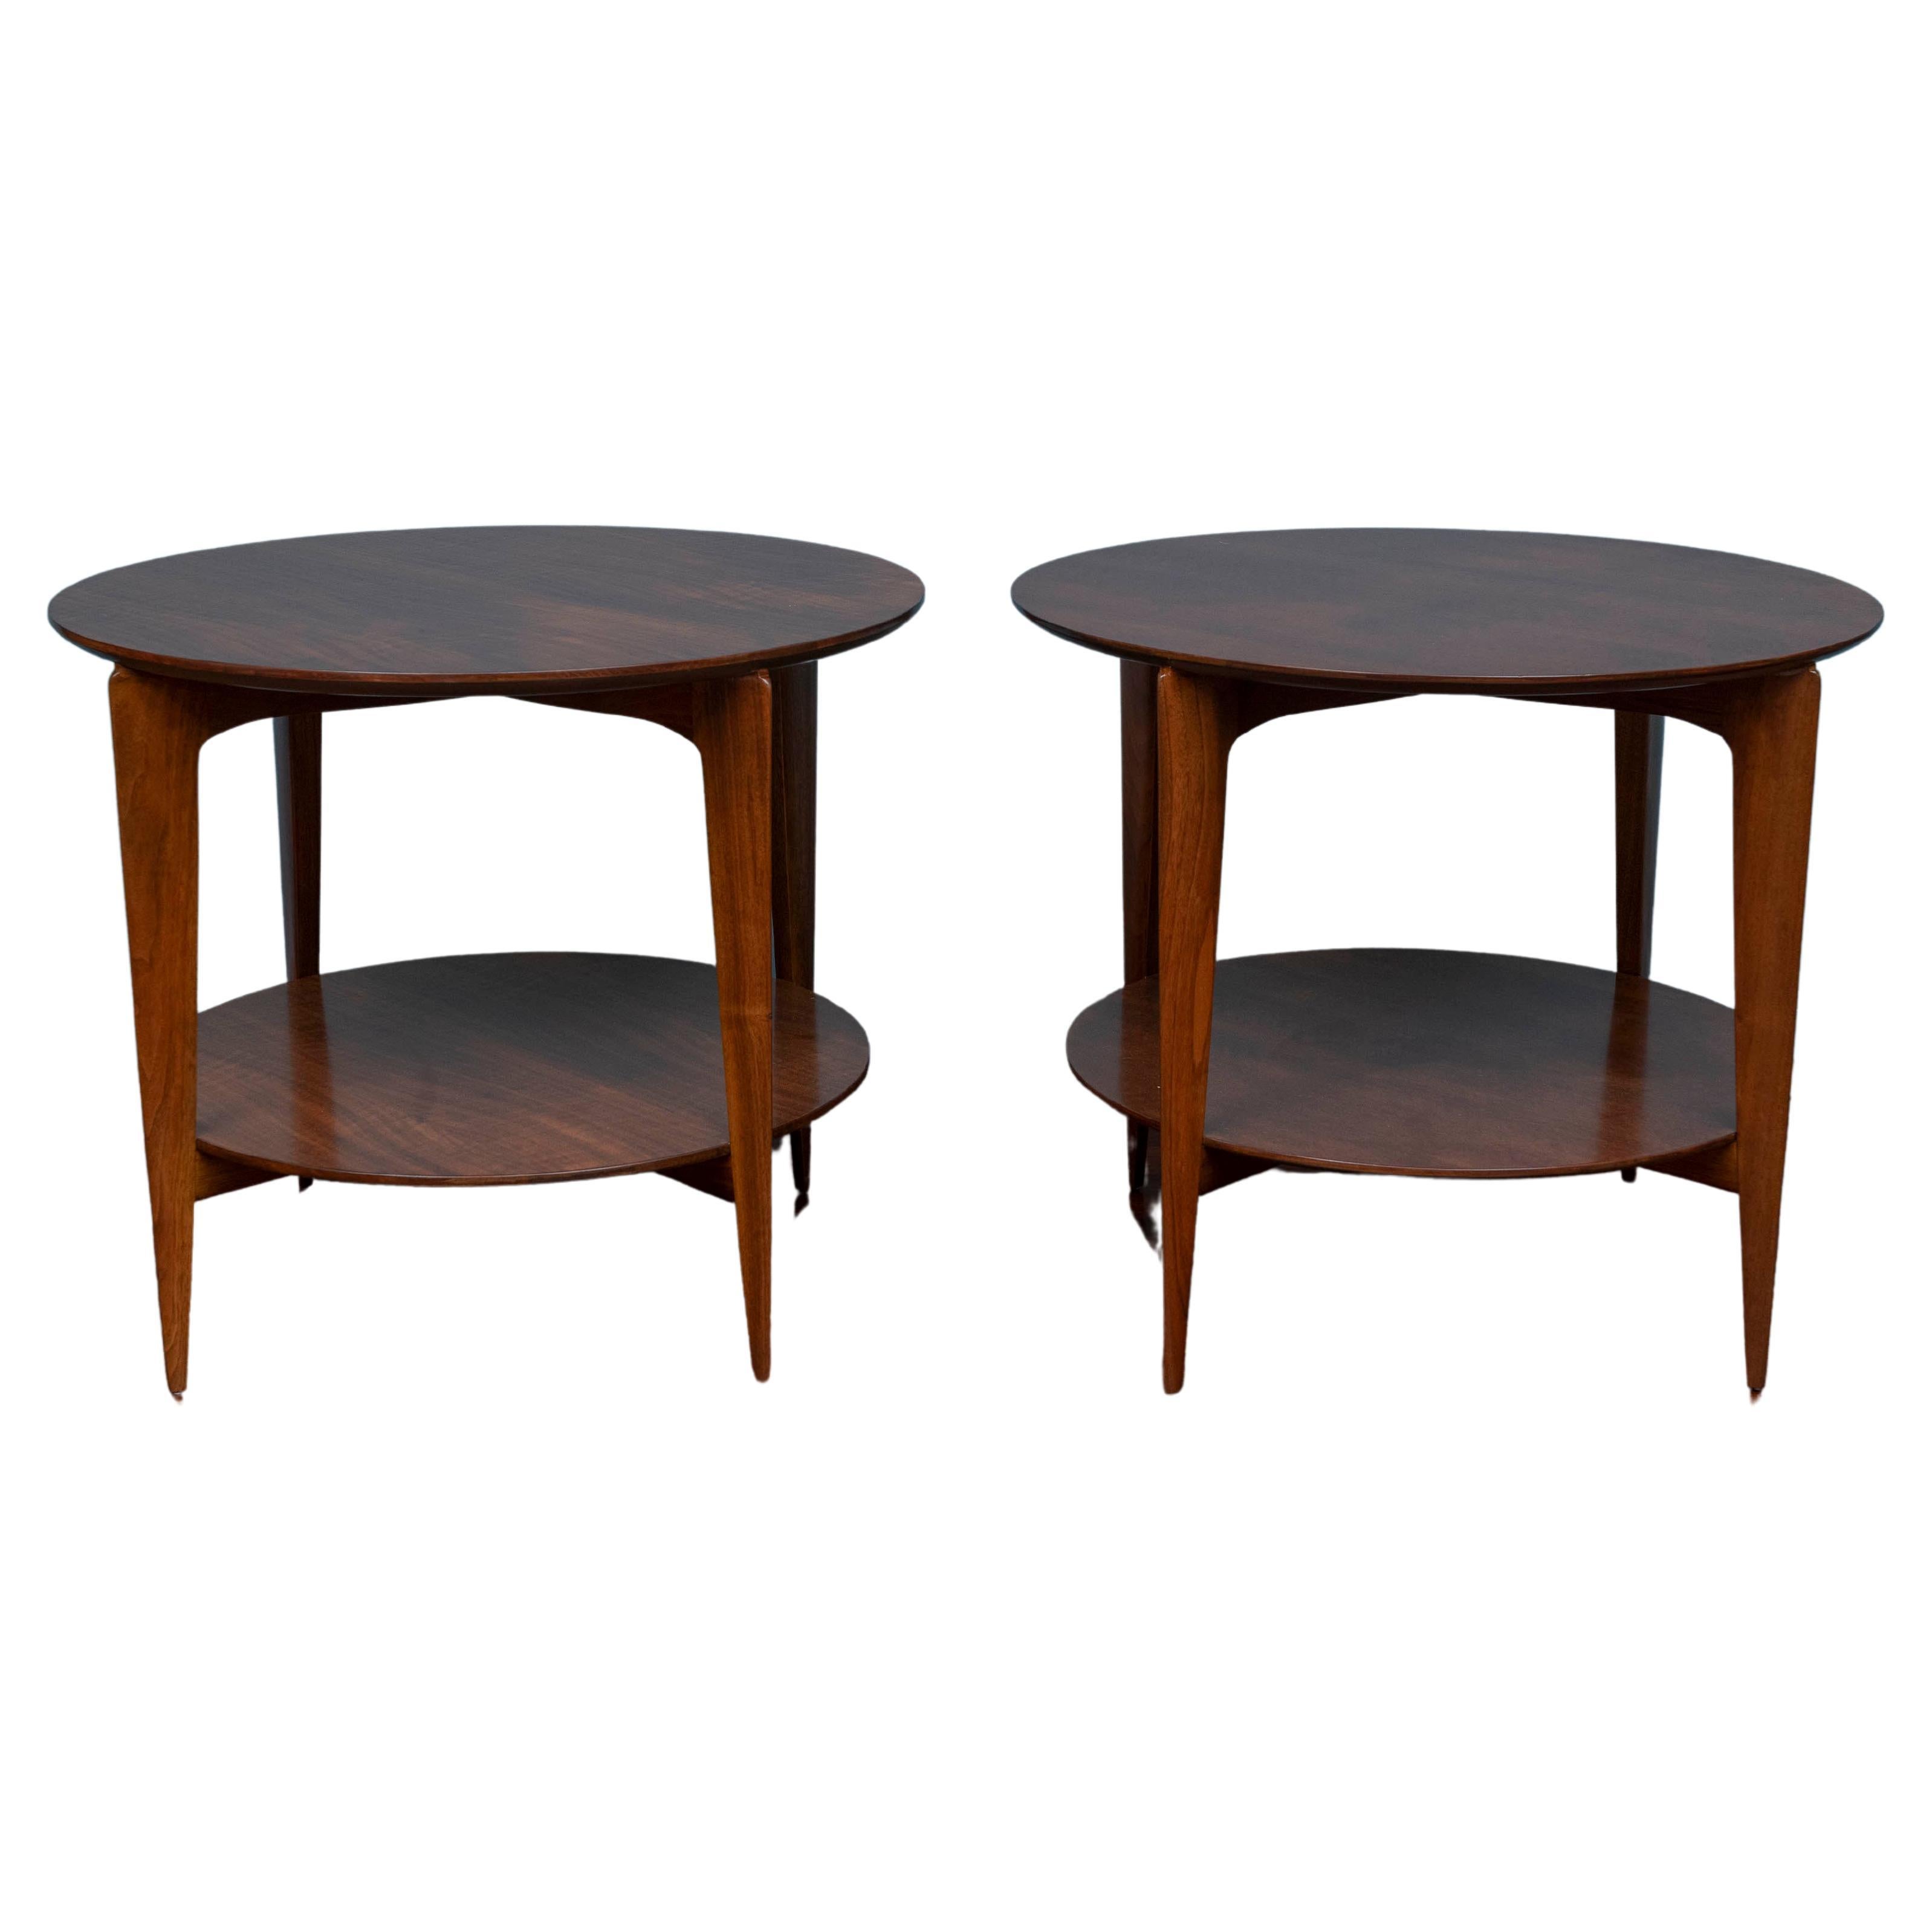 Gio Ponti Ocassional Tables for Singer & Sons Model 2136